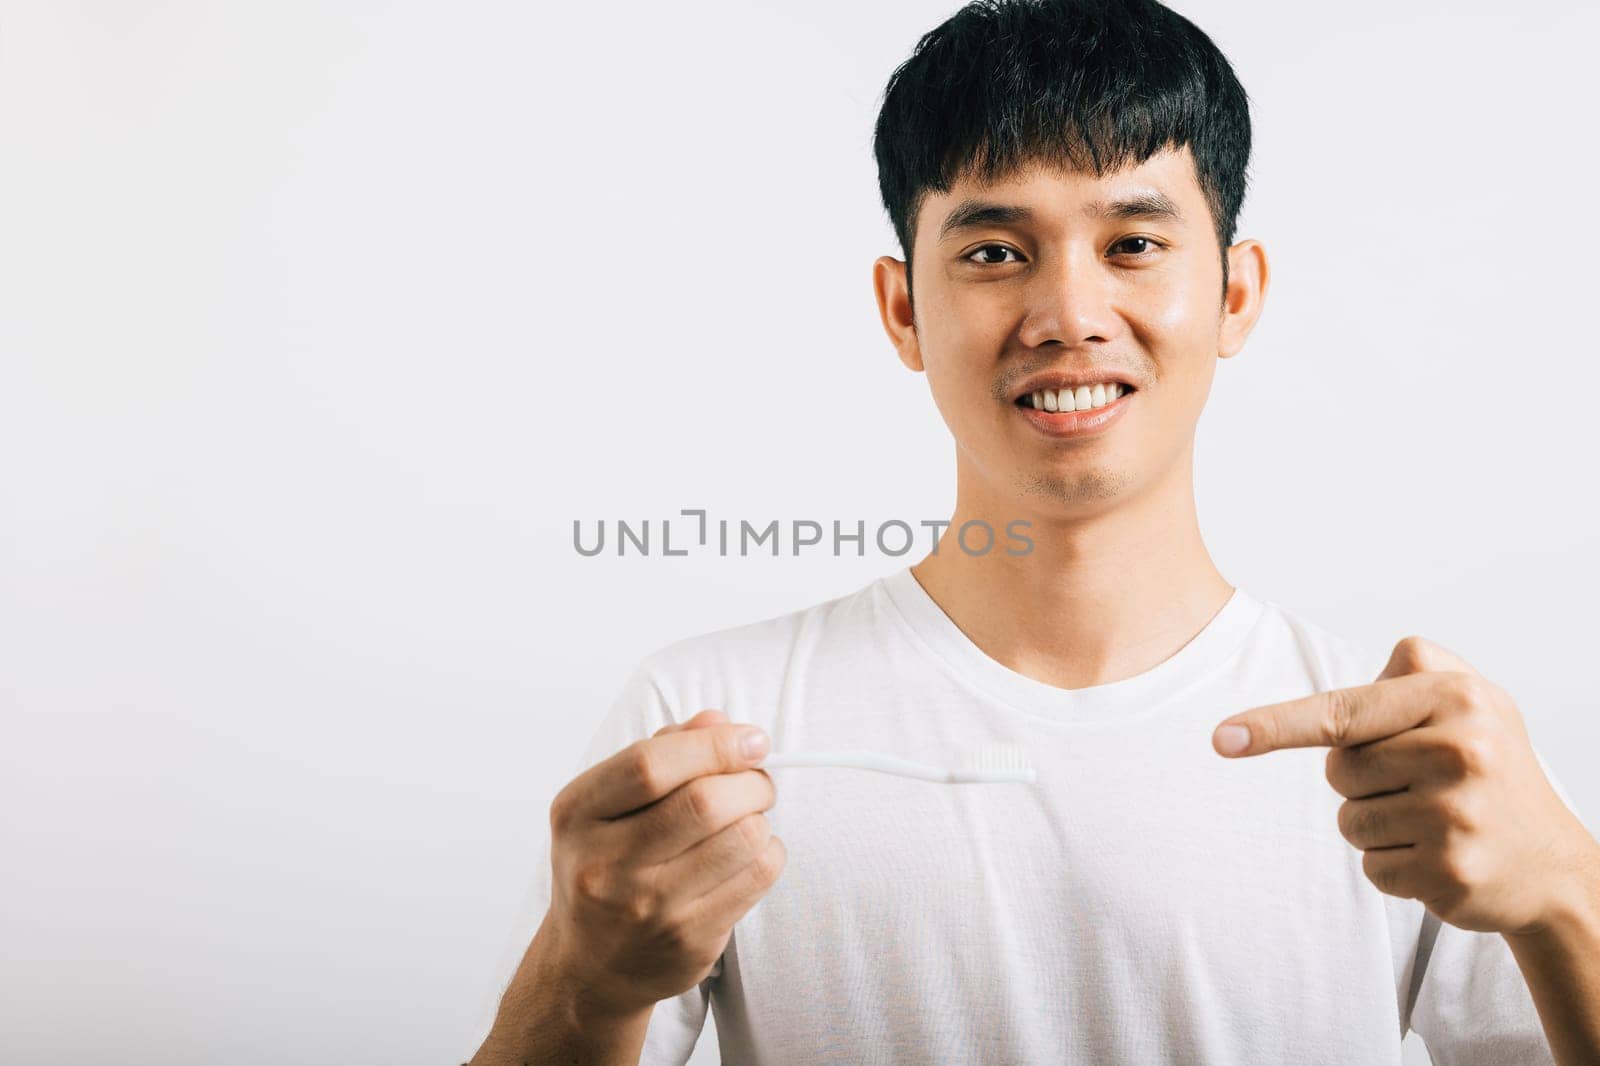 Smiling Asian teen brushes teeth in the morning, holding a toothbrush and pointing to it in a studio shot isolated on white background. Dental health concept with positive expression.